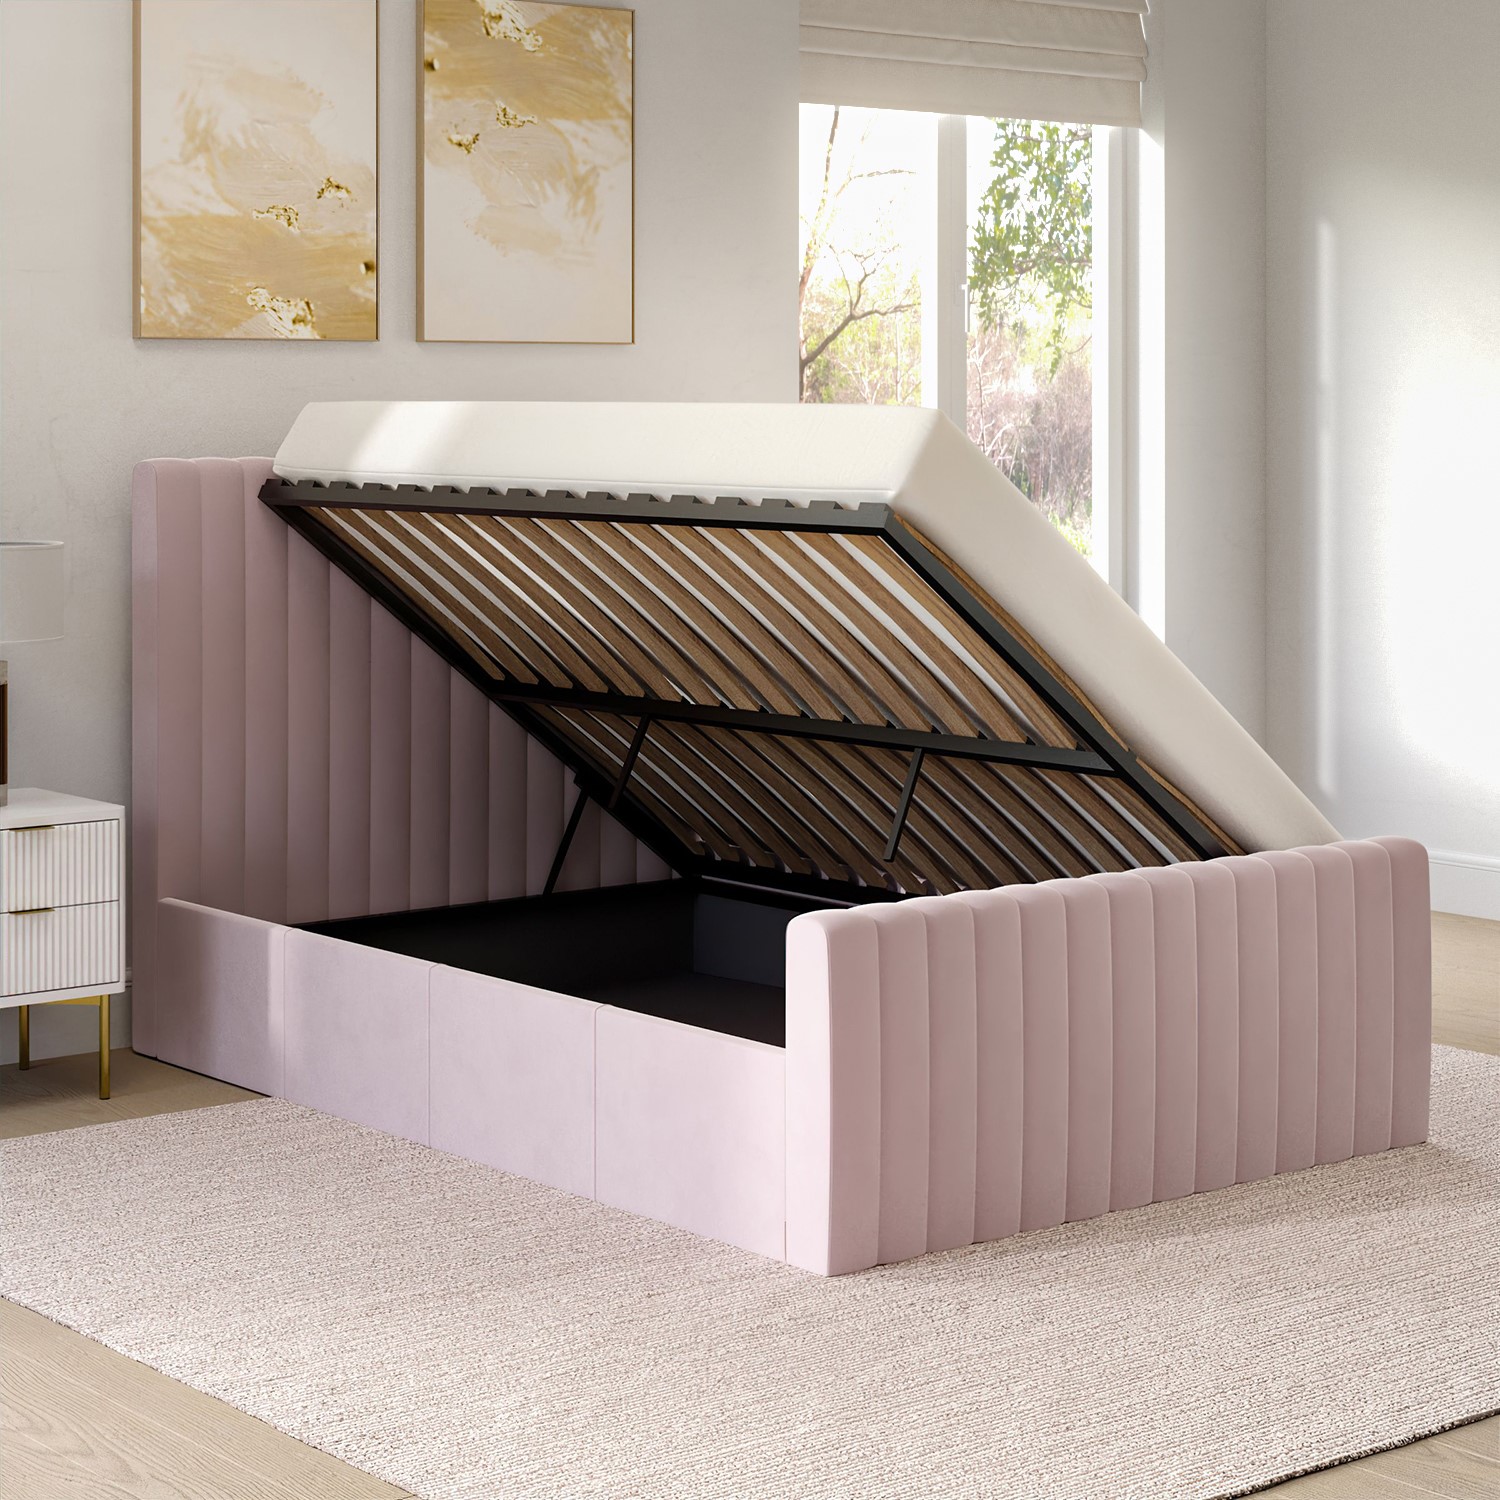 Read more about Side opening pink velvet double ottoman bed khloe